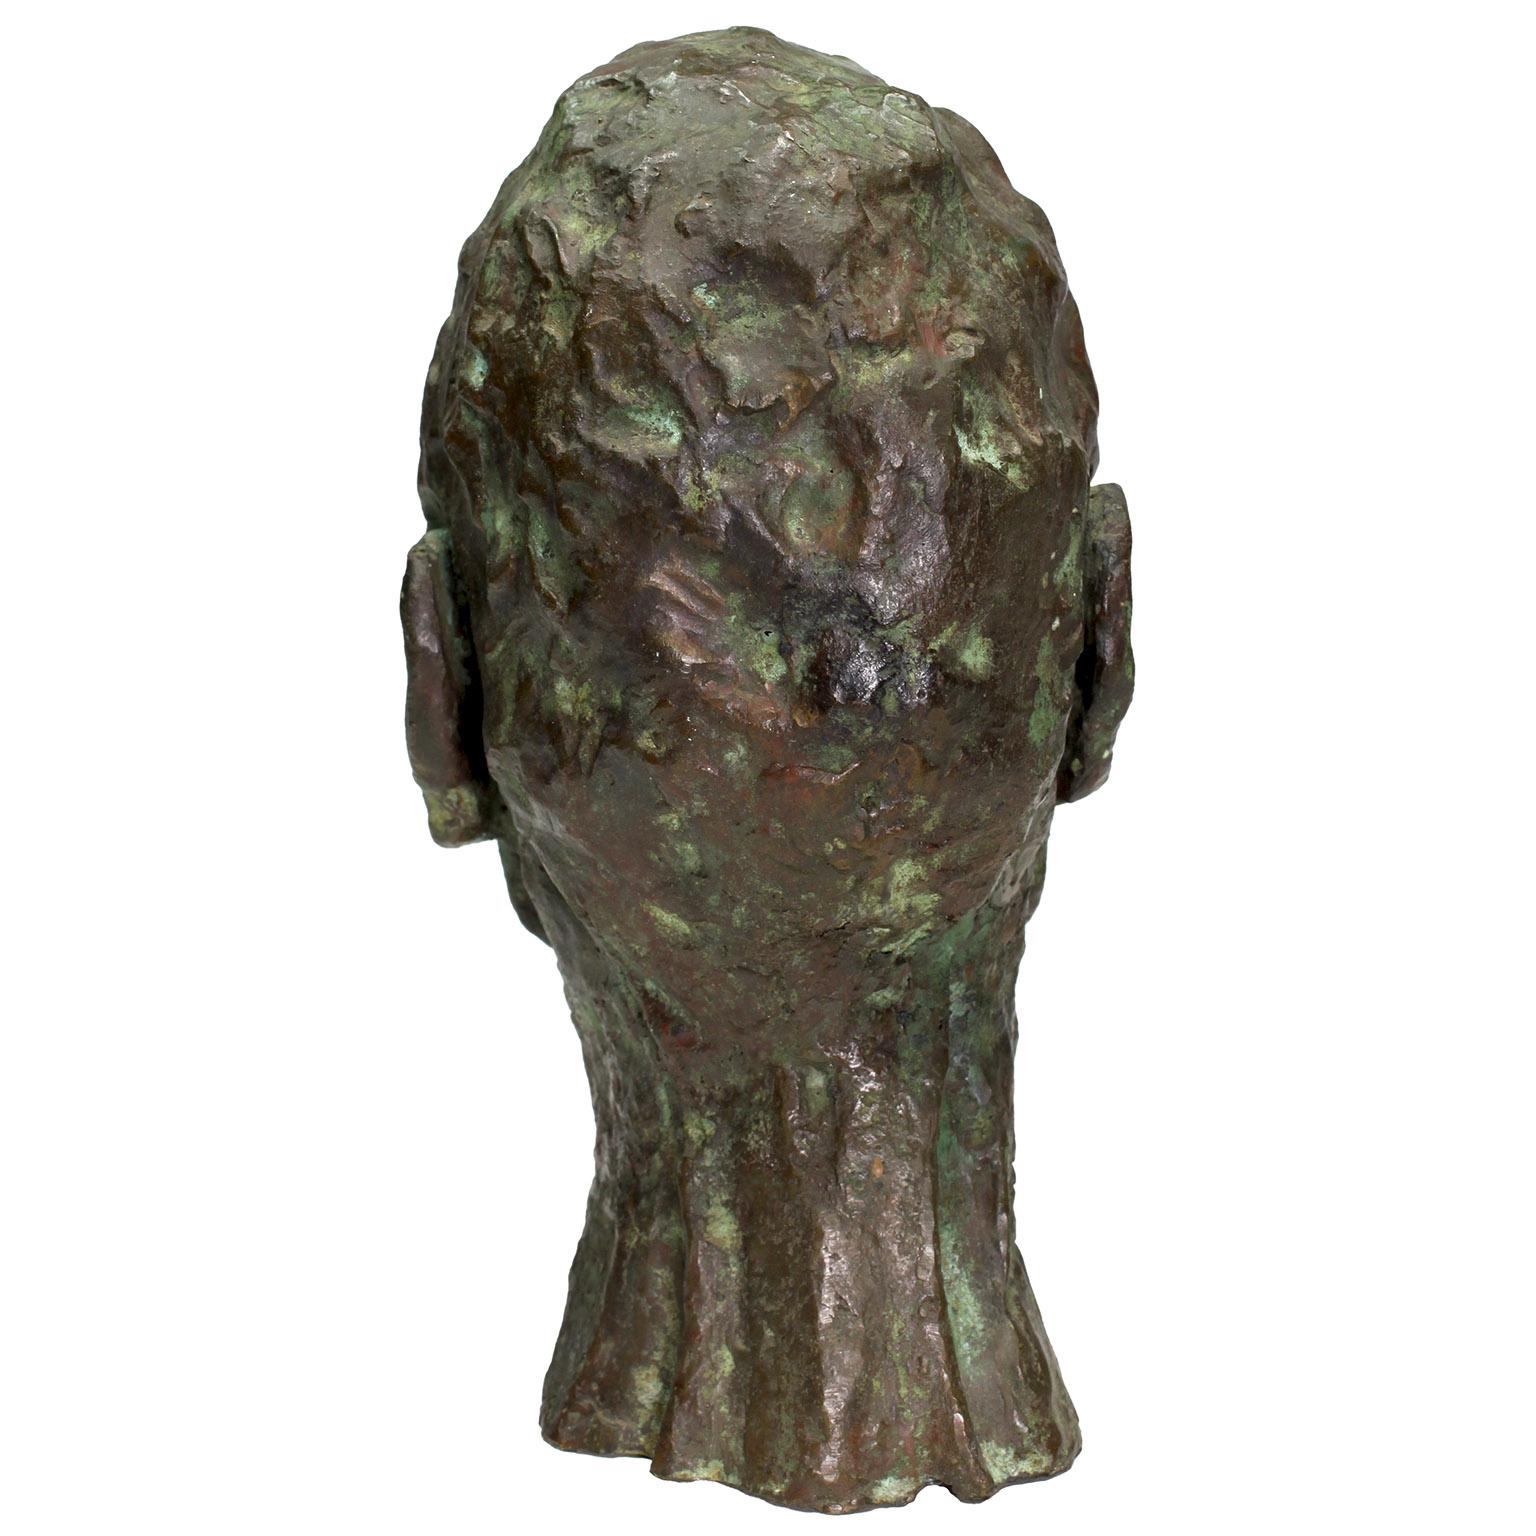 Unknown Fine Bronze Bust of a Man in Manner of Sir Jacob Epstein (British 1880-1959) For Sale